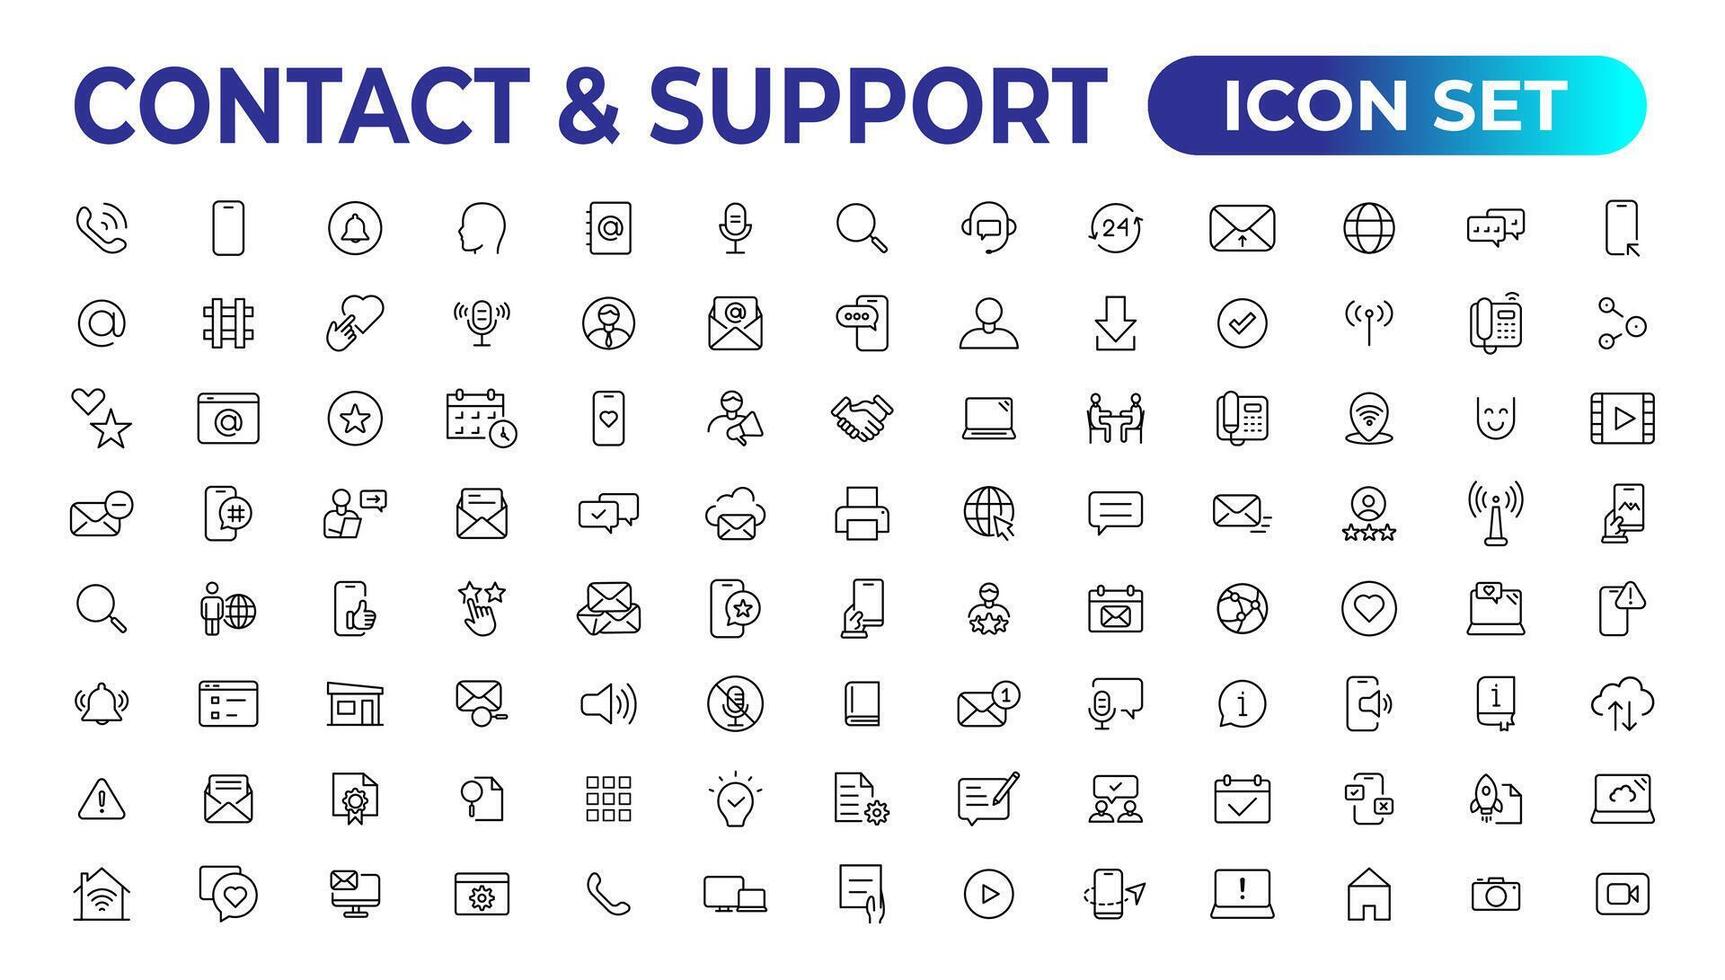 Contact and support web icons in line style. Web and mobile icon. Chat, support, message, phone. Vector illustration.